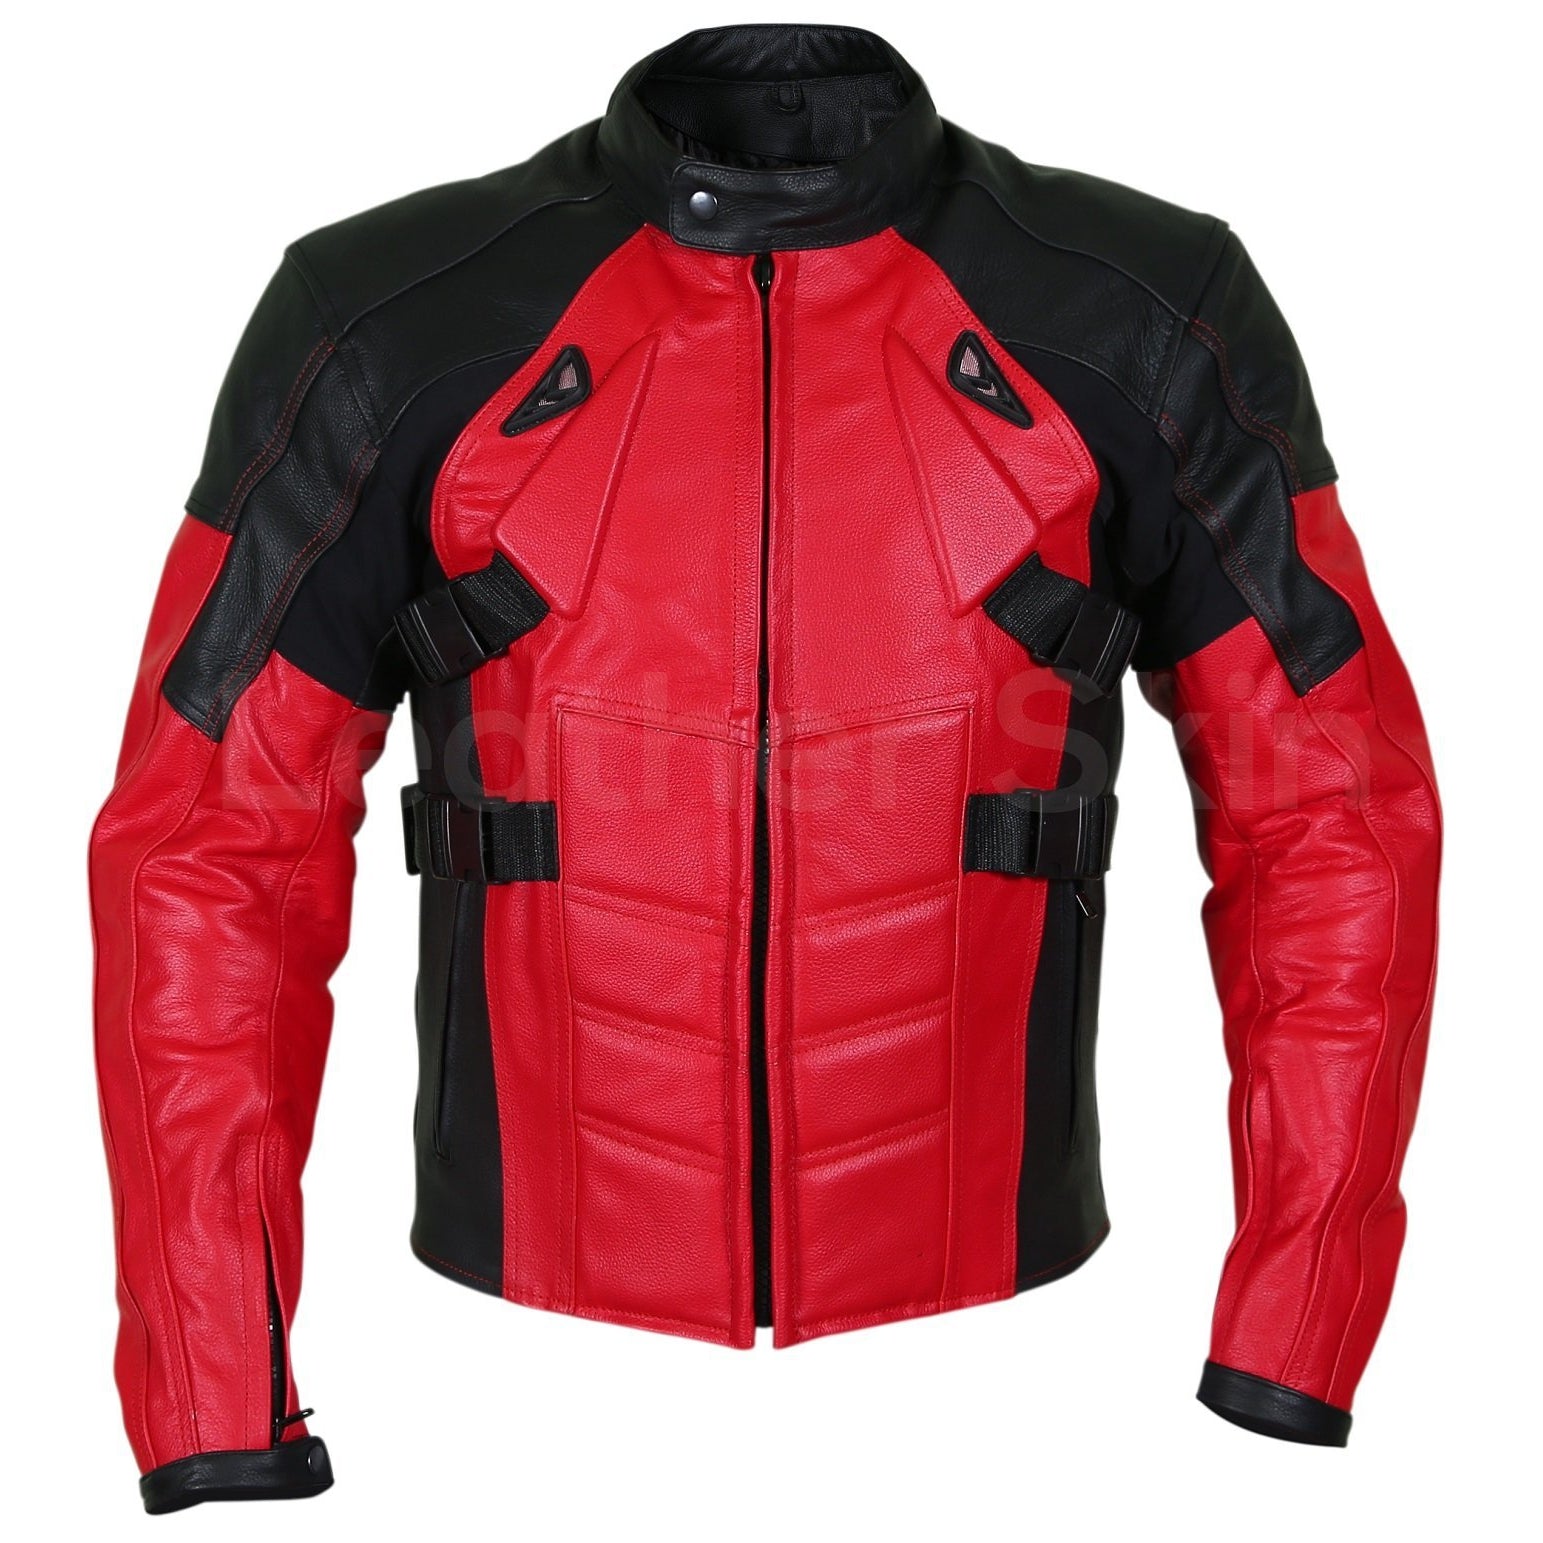 New Hot Men's Genuine Lambskin Leather Jacket Red Slim fit Motorcycle jacket  #AriesLeat… | Leather jacket men style, Red leather jacket men, Lambskin leather  jacket